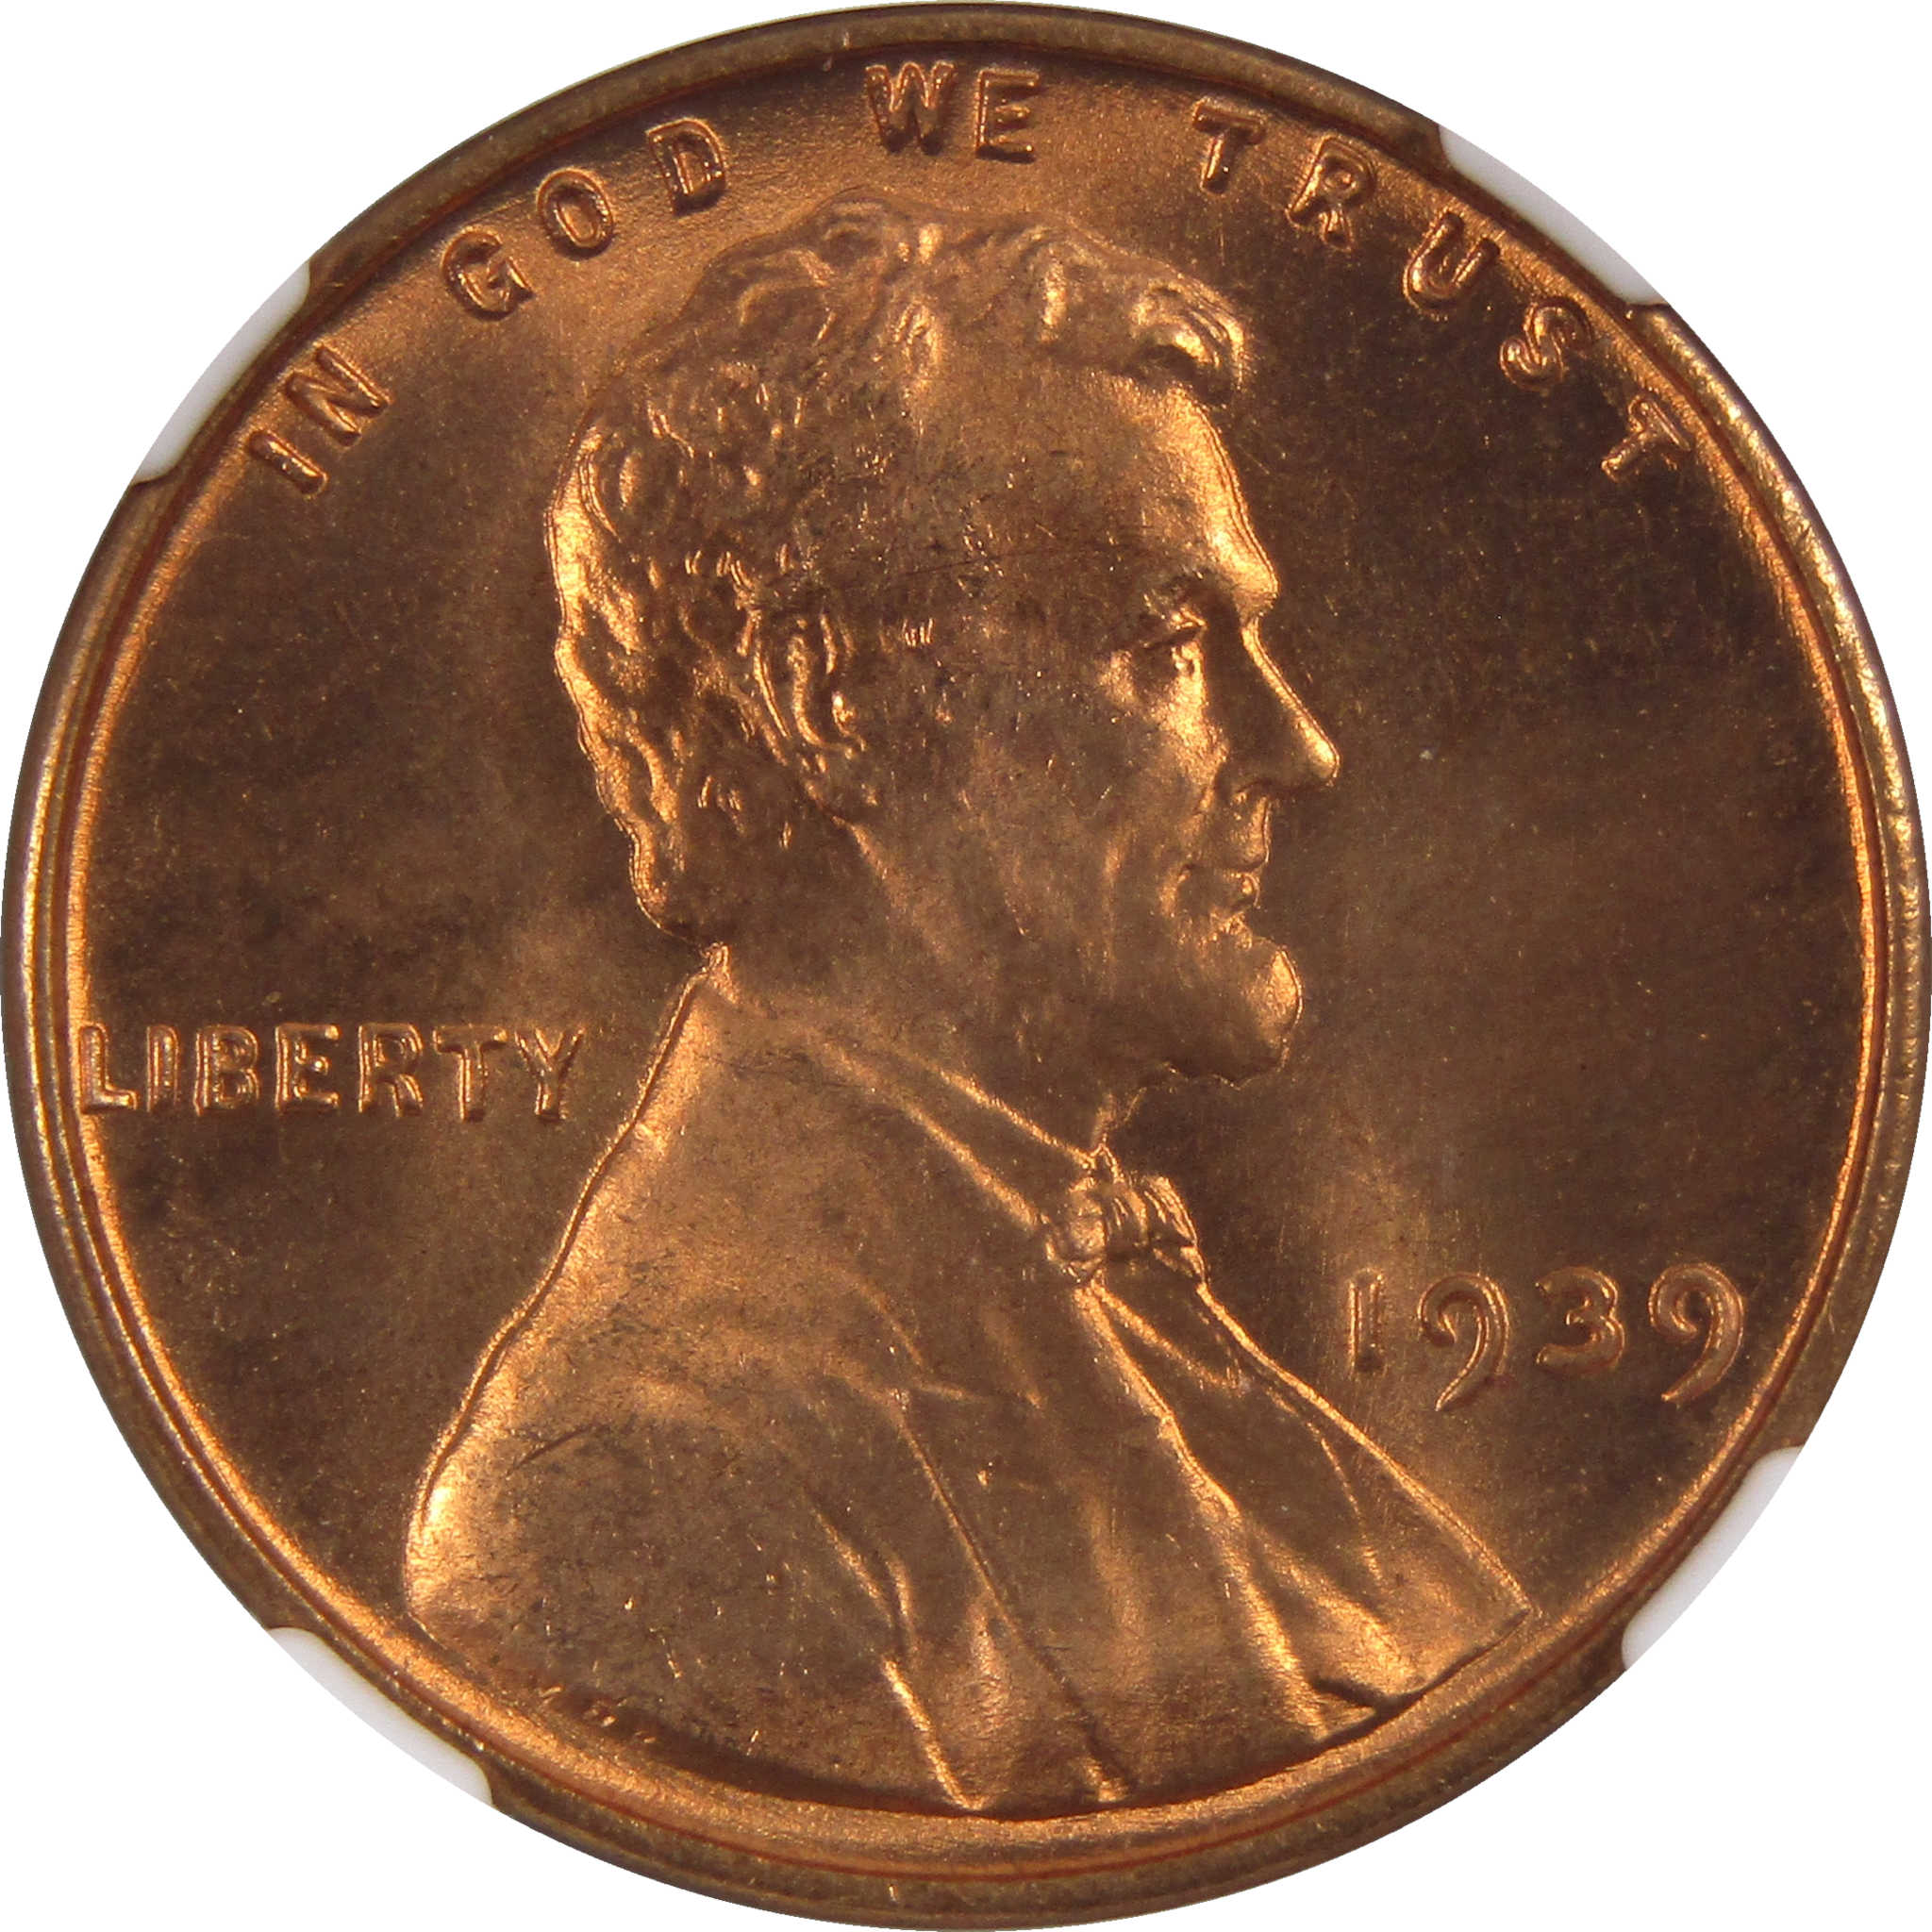 1939 Lincoln Wheat Cent MS 67 RD NGC Penny 1c Uncirculated SKU:I3150